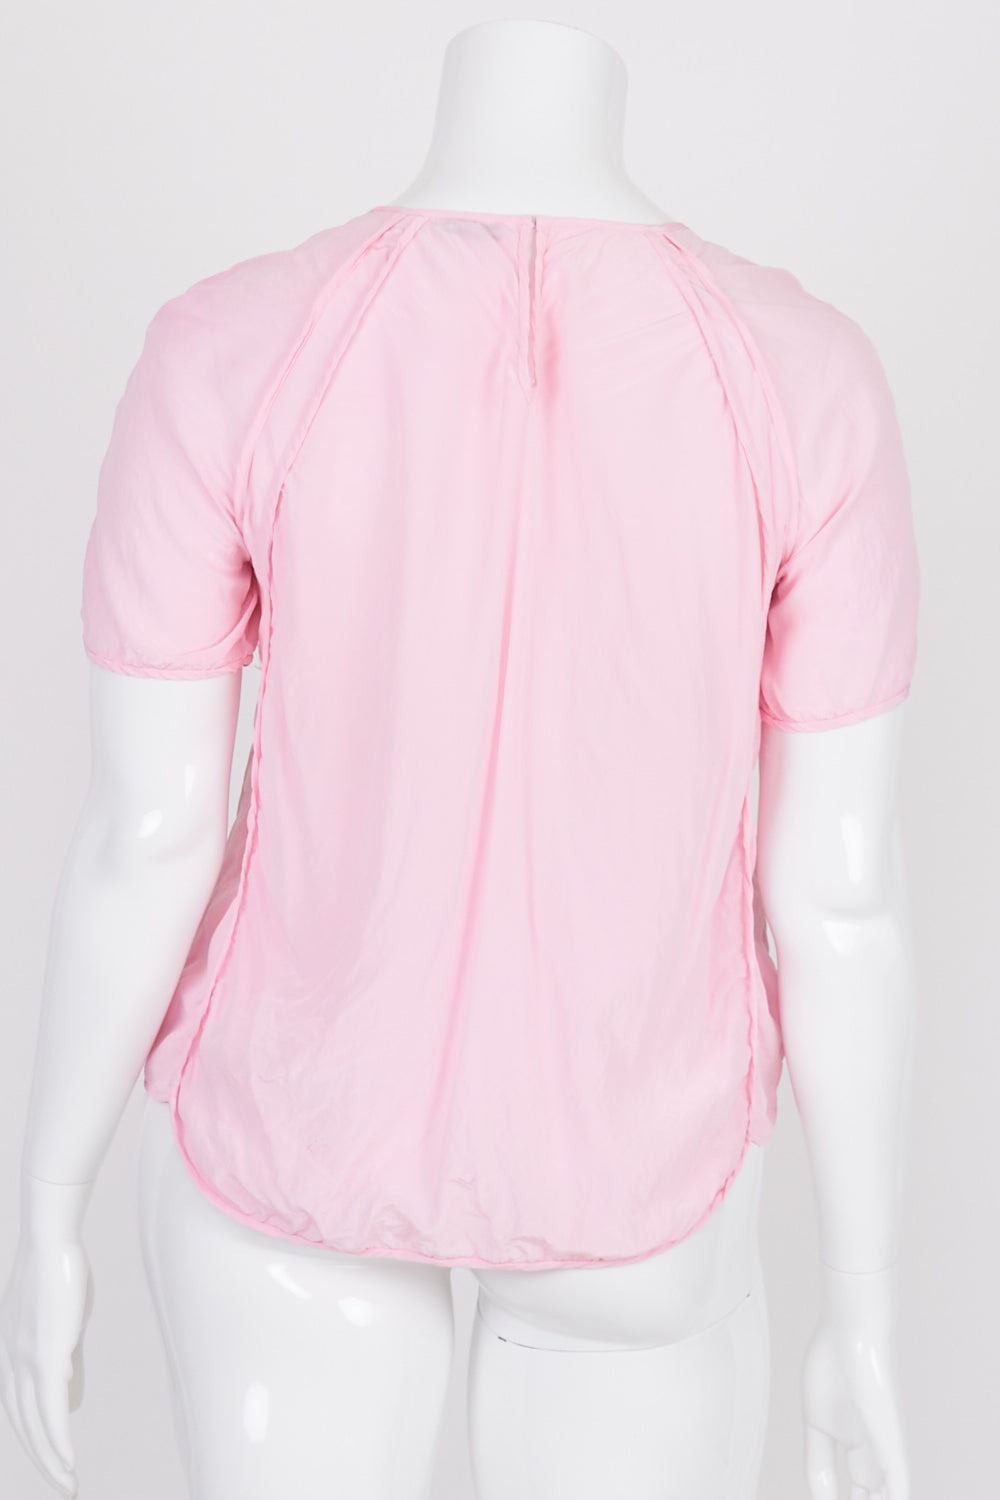 Country Road Pink Silk Top XL